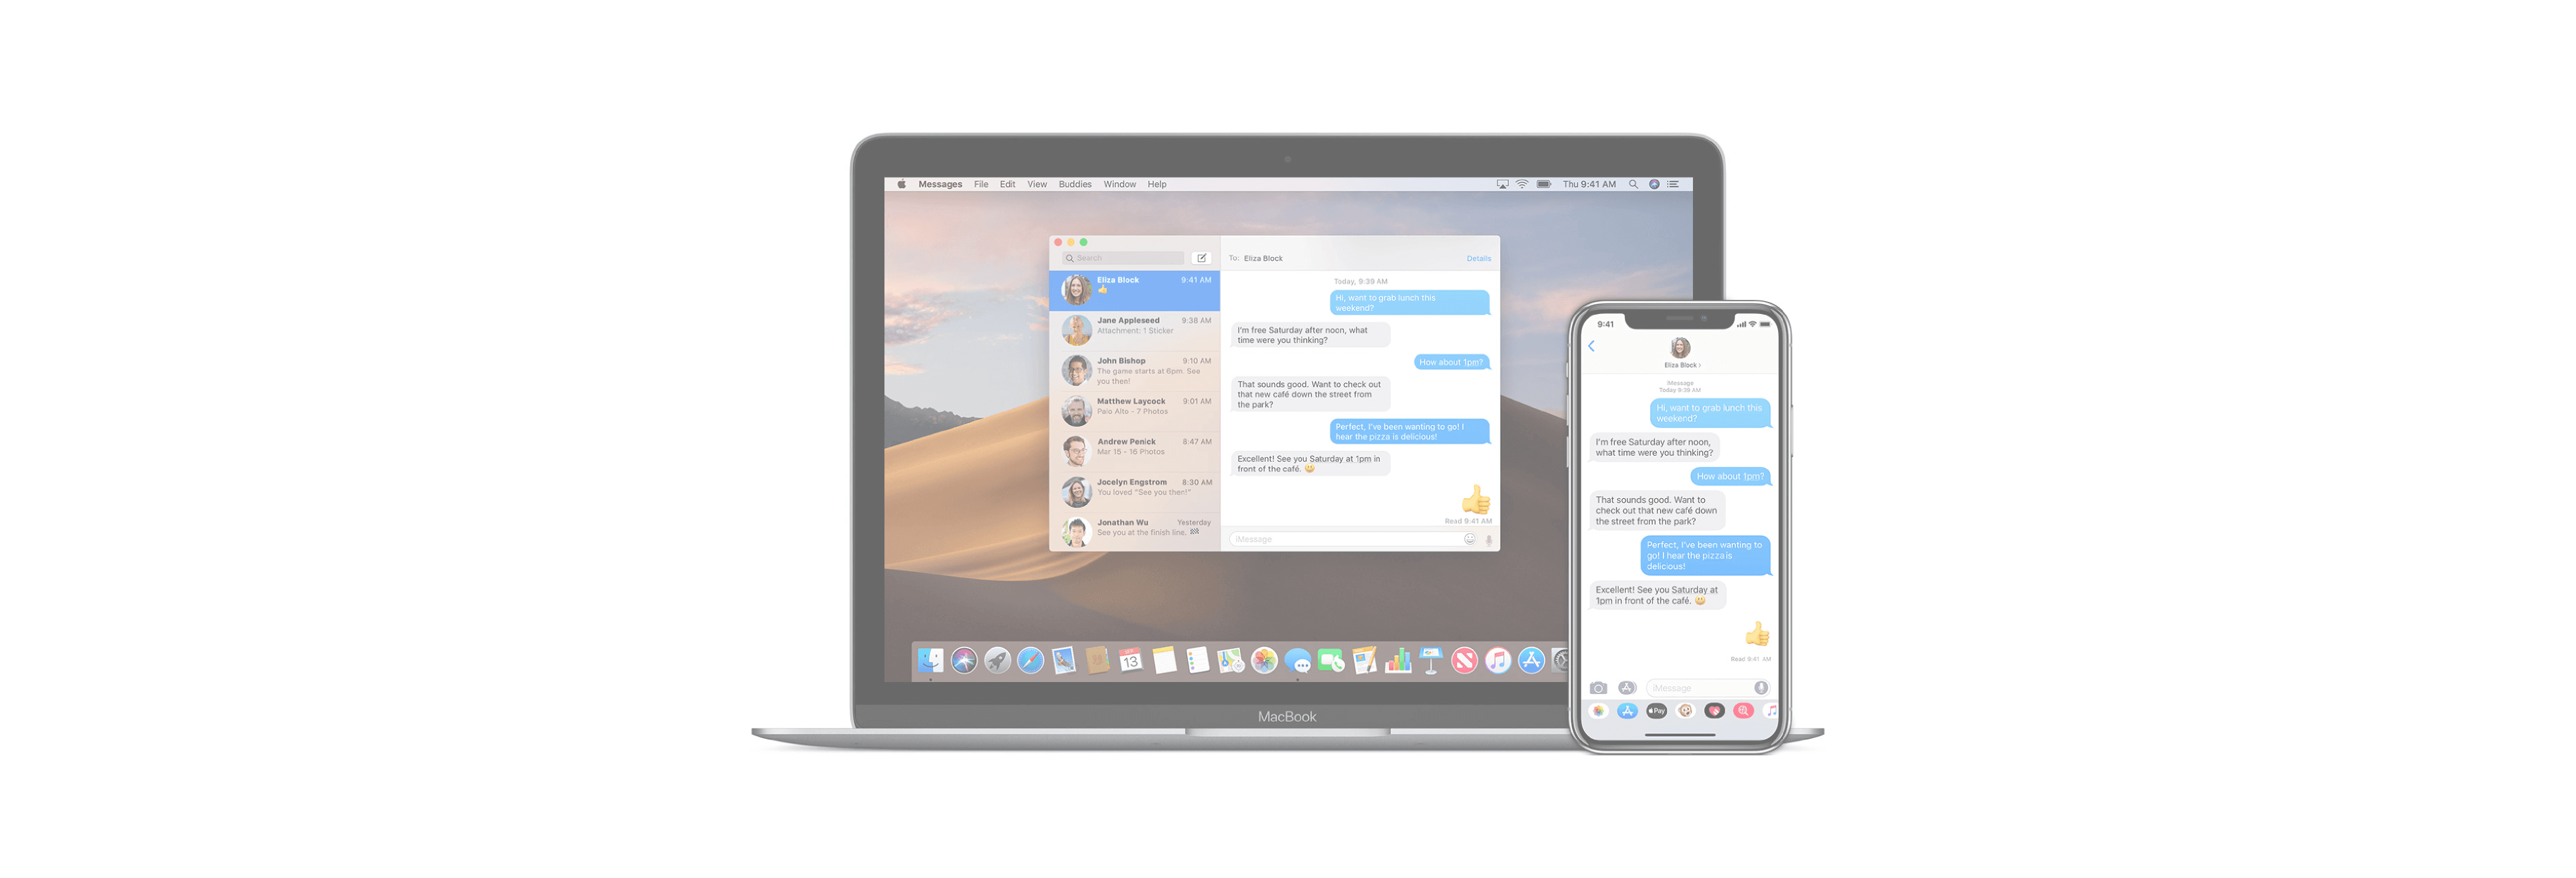 How to get text messages on your Mac